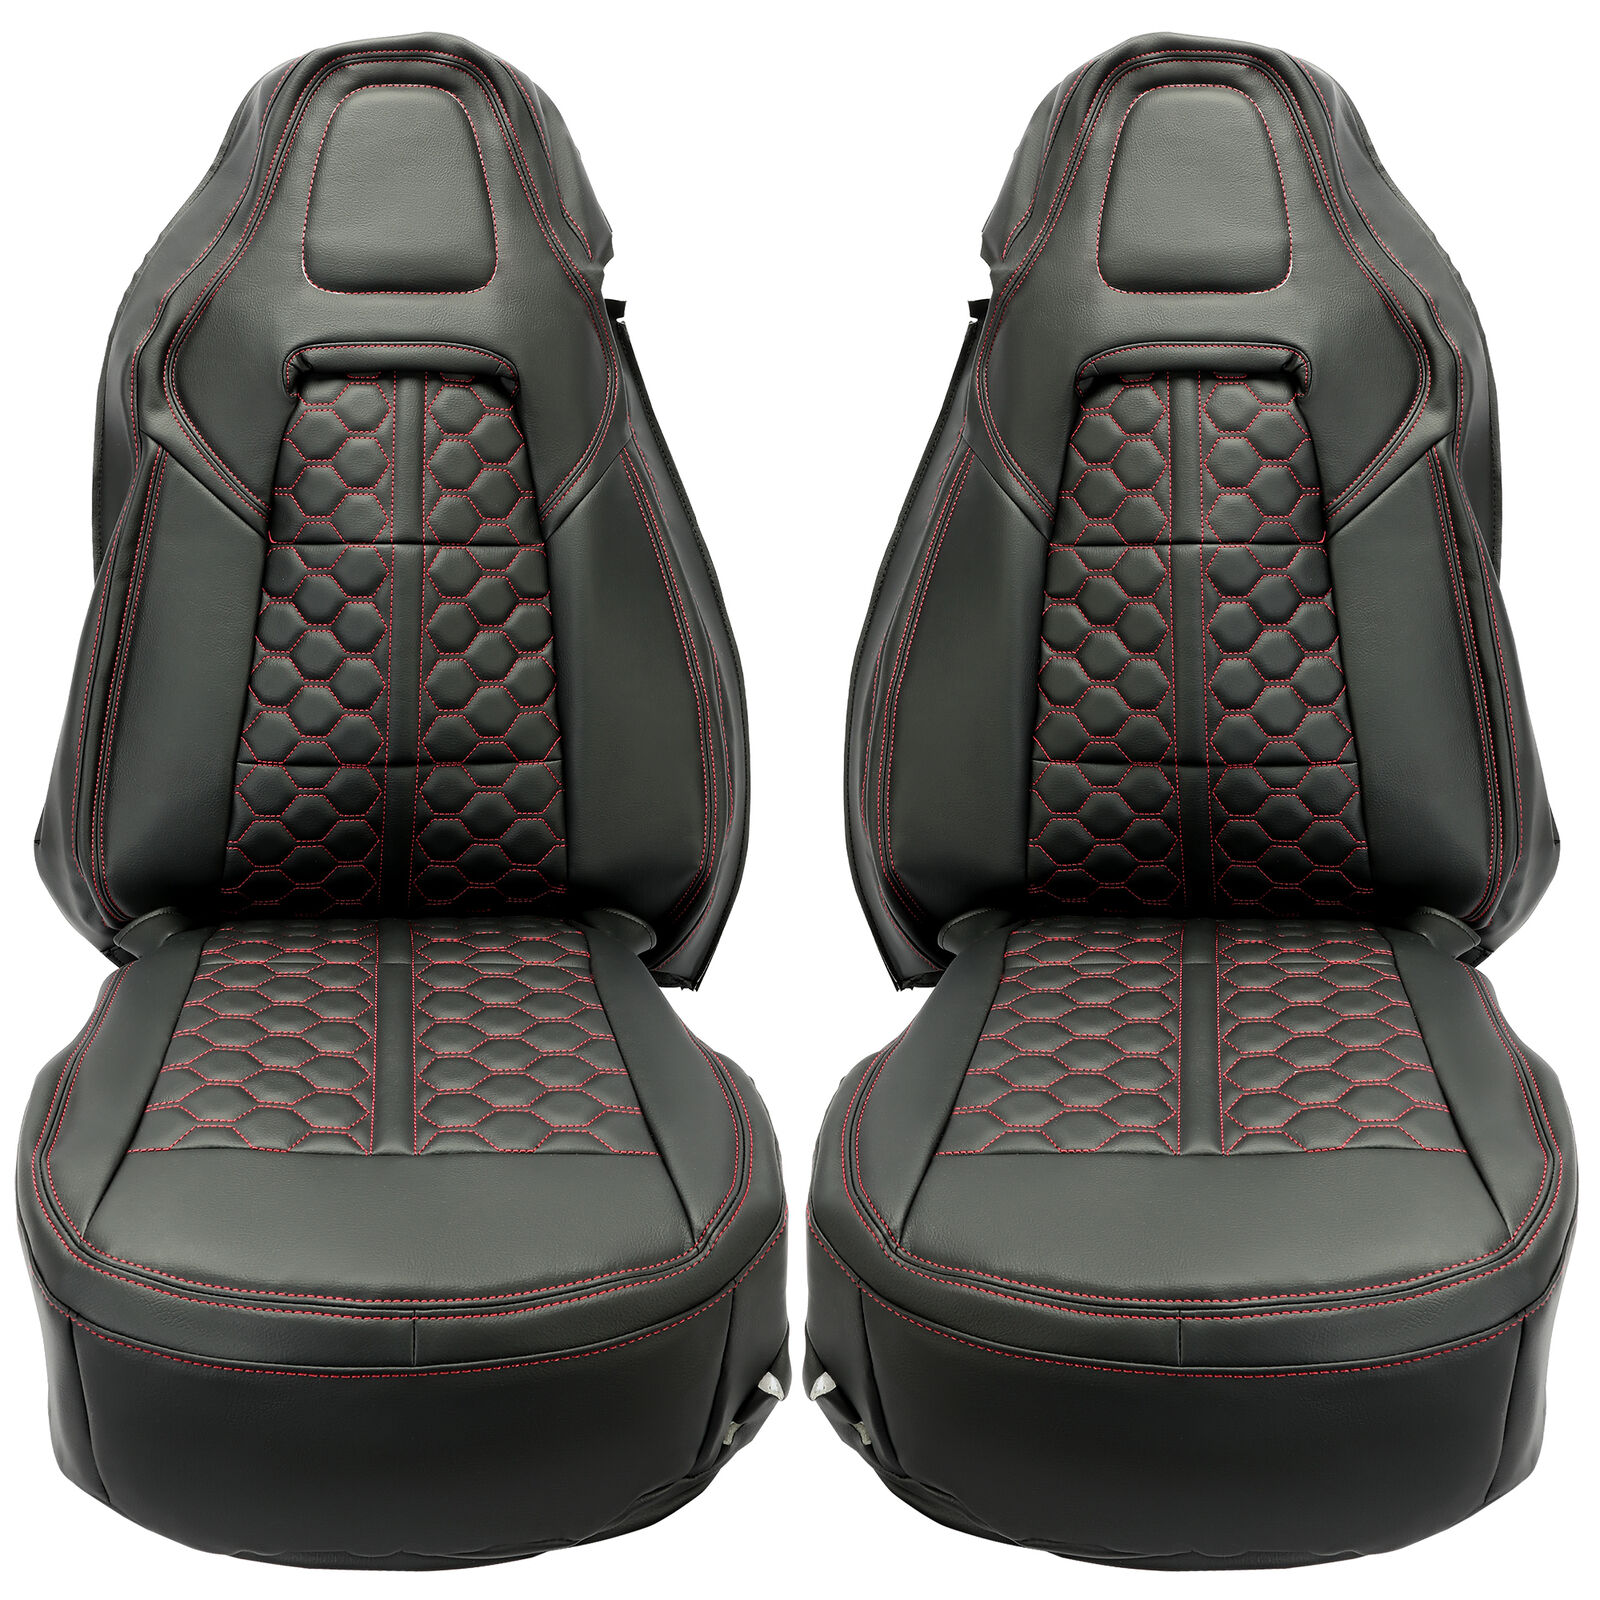 Black Seat Covers Replacement For 2014-2019 C7 Corvette Grand Touring GT